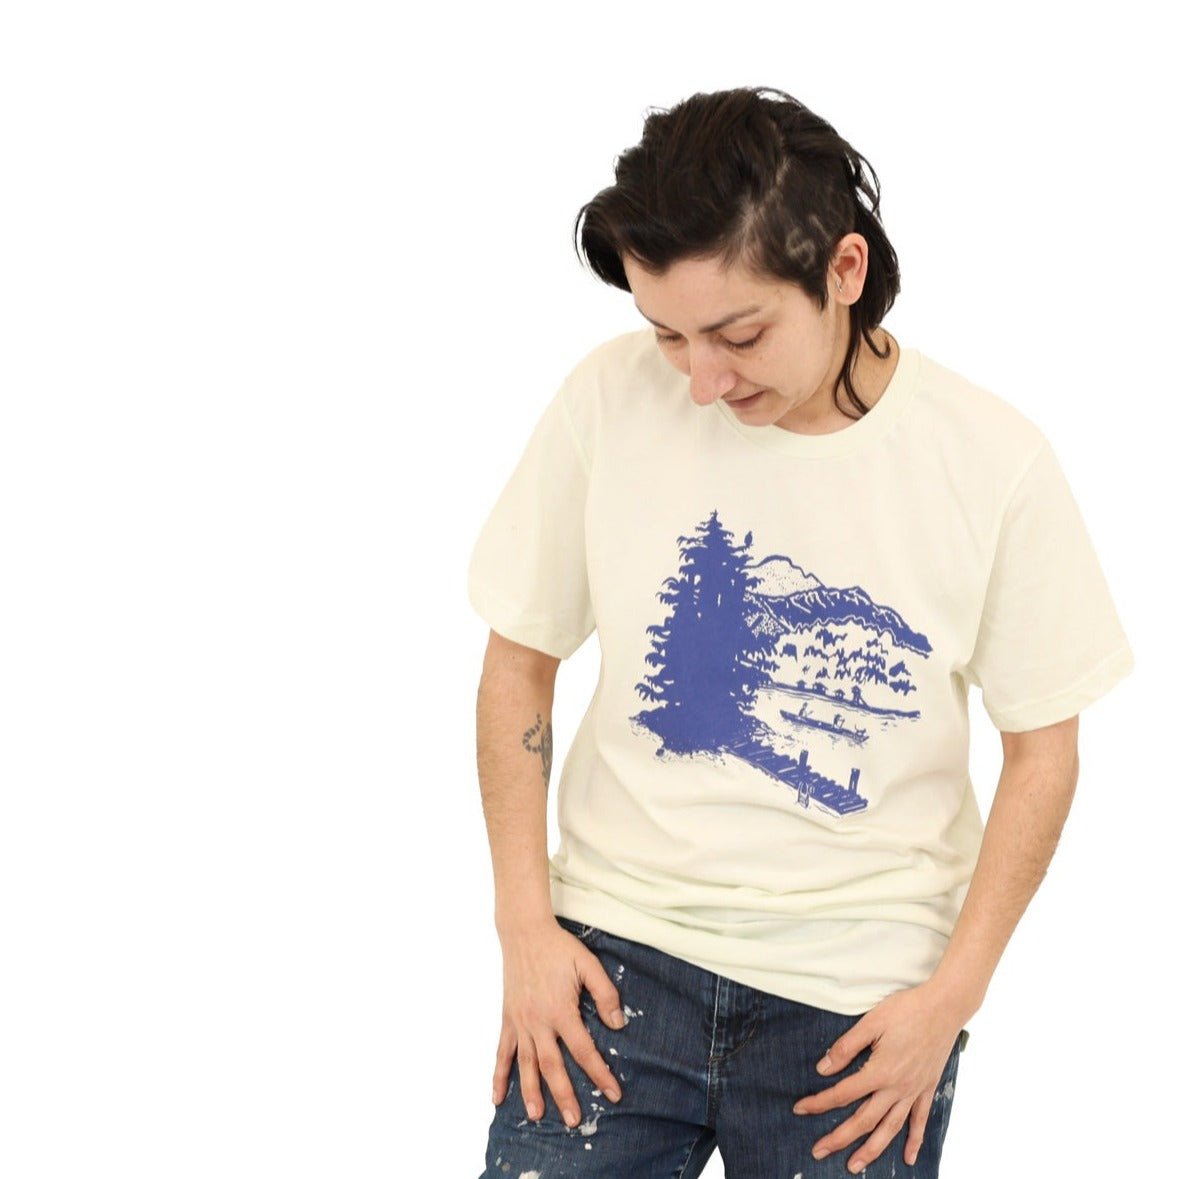 Woman wearing citron(light tan) t-shirt with blue print of lake scene with a dock, canoe, trees, mountains, etc.